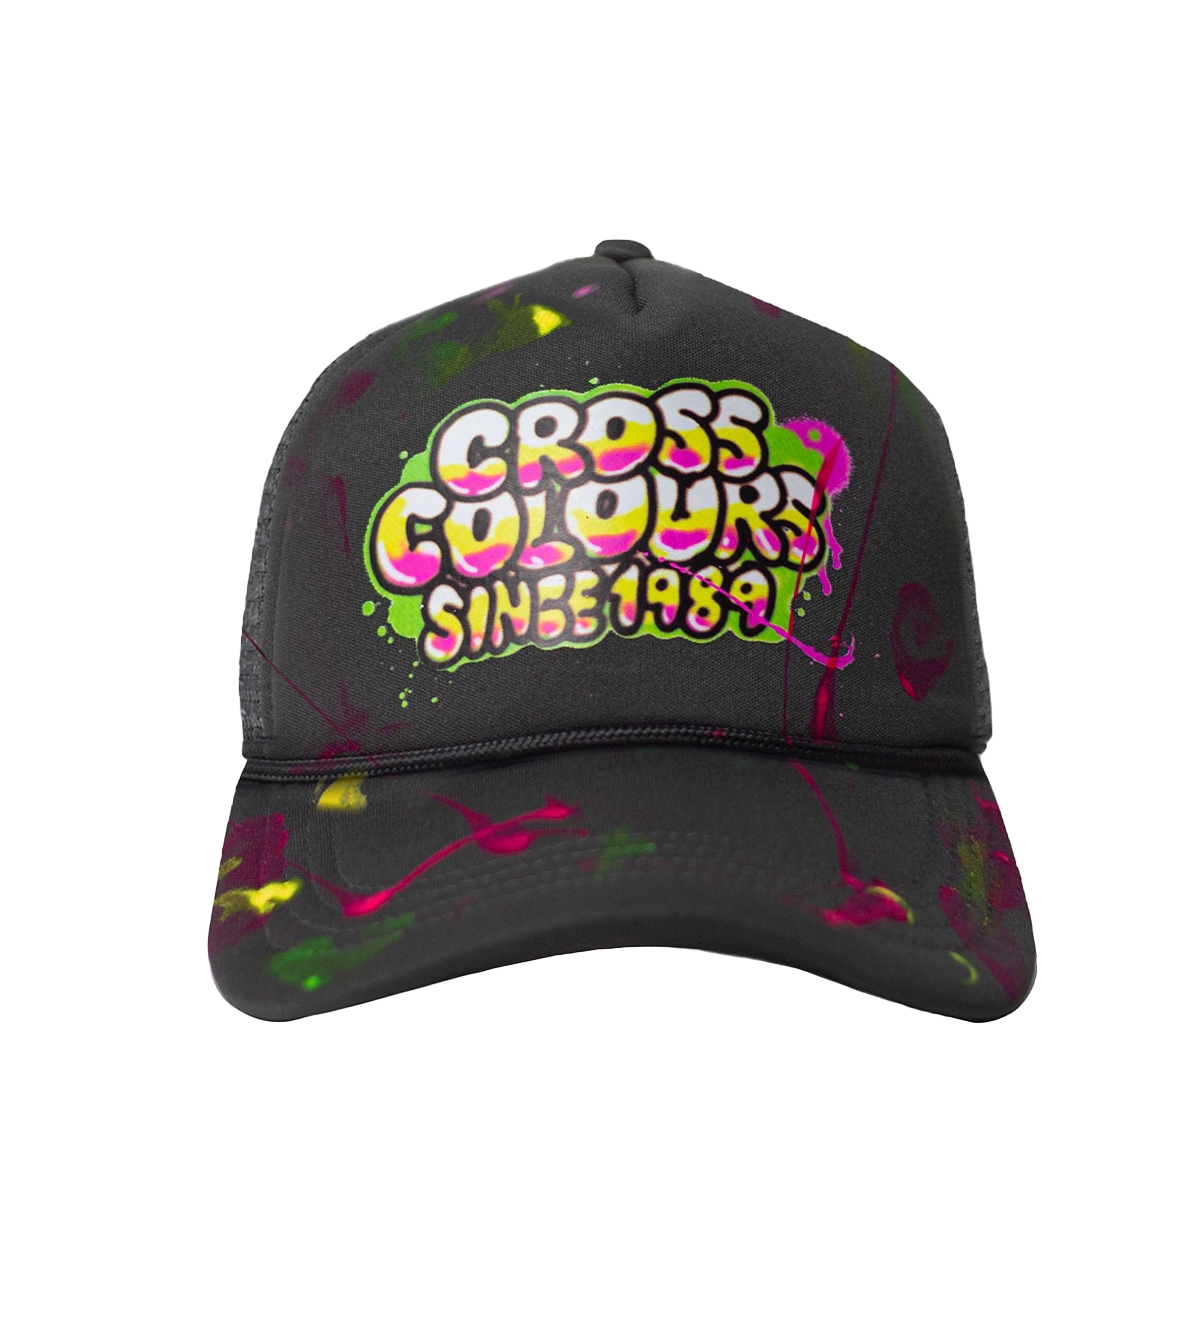 Cross Colors Since 1989 Airbrushed Trucker Hat with paint splatter. - Black